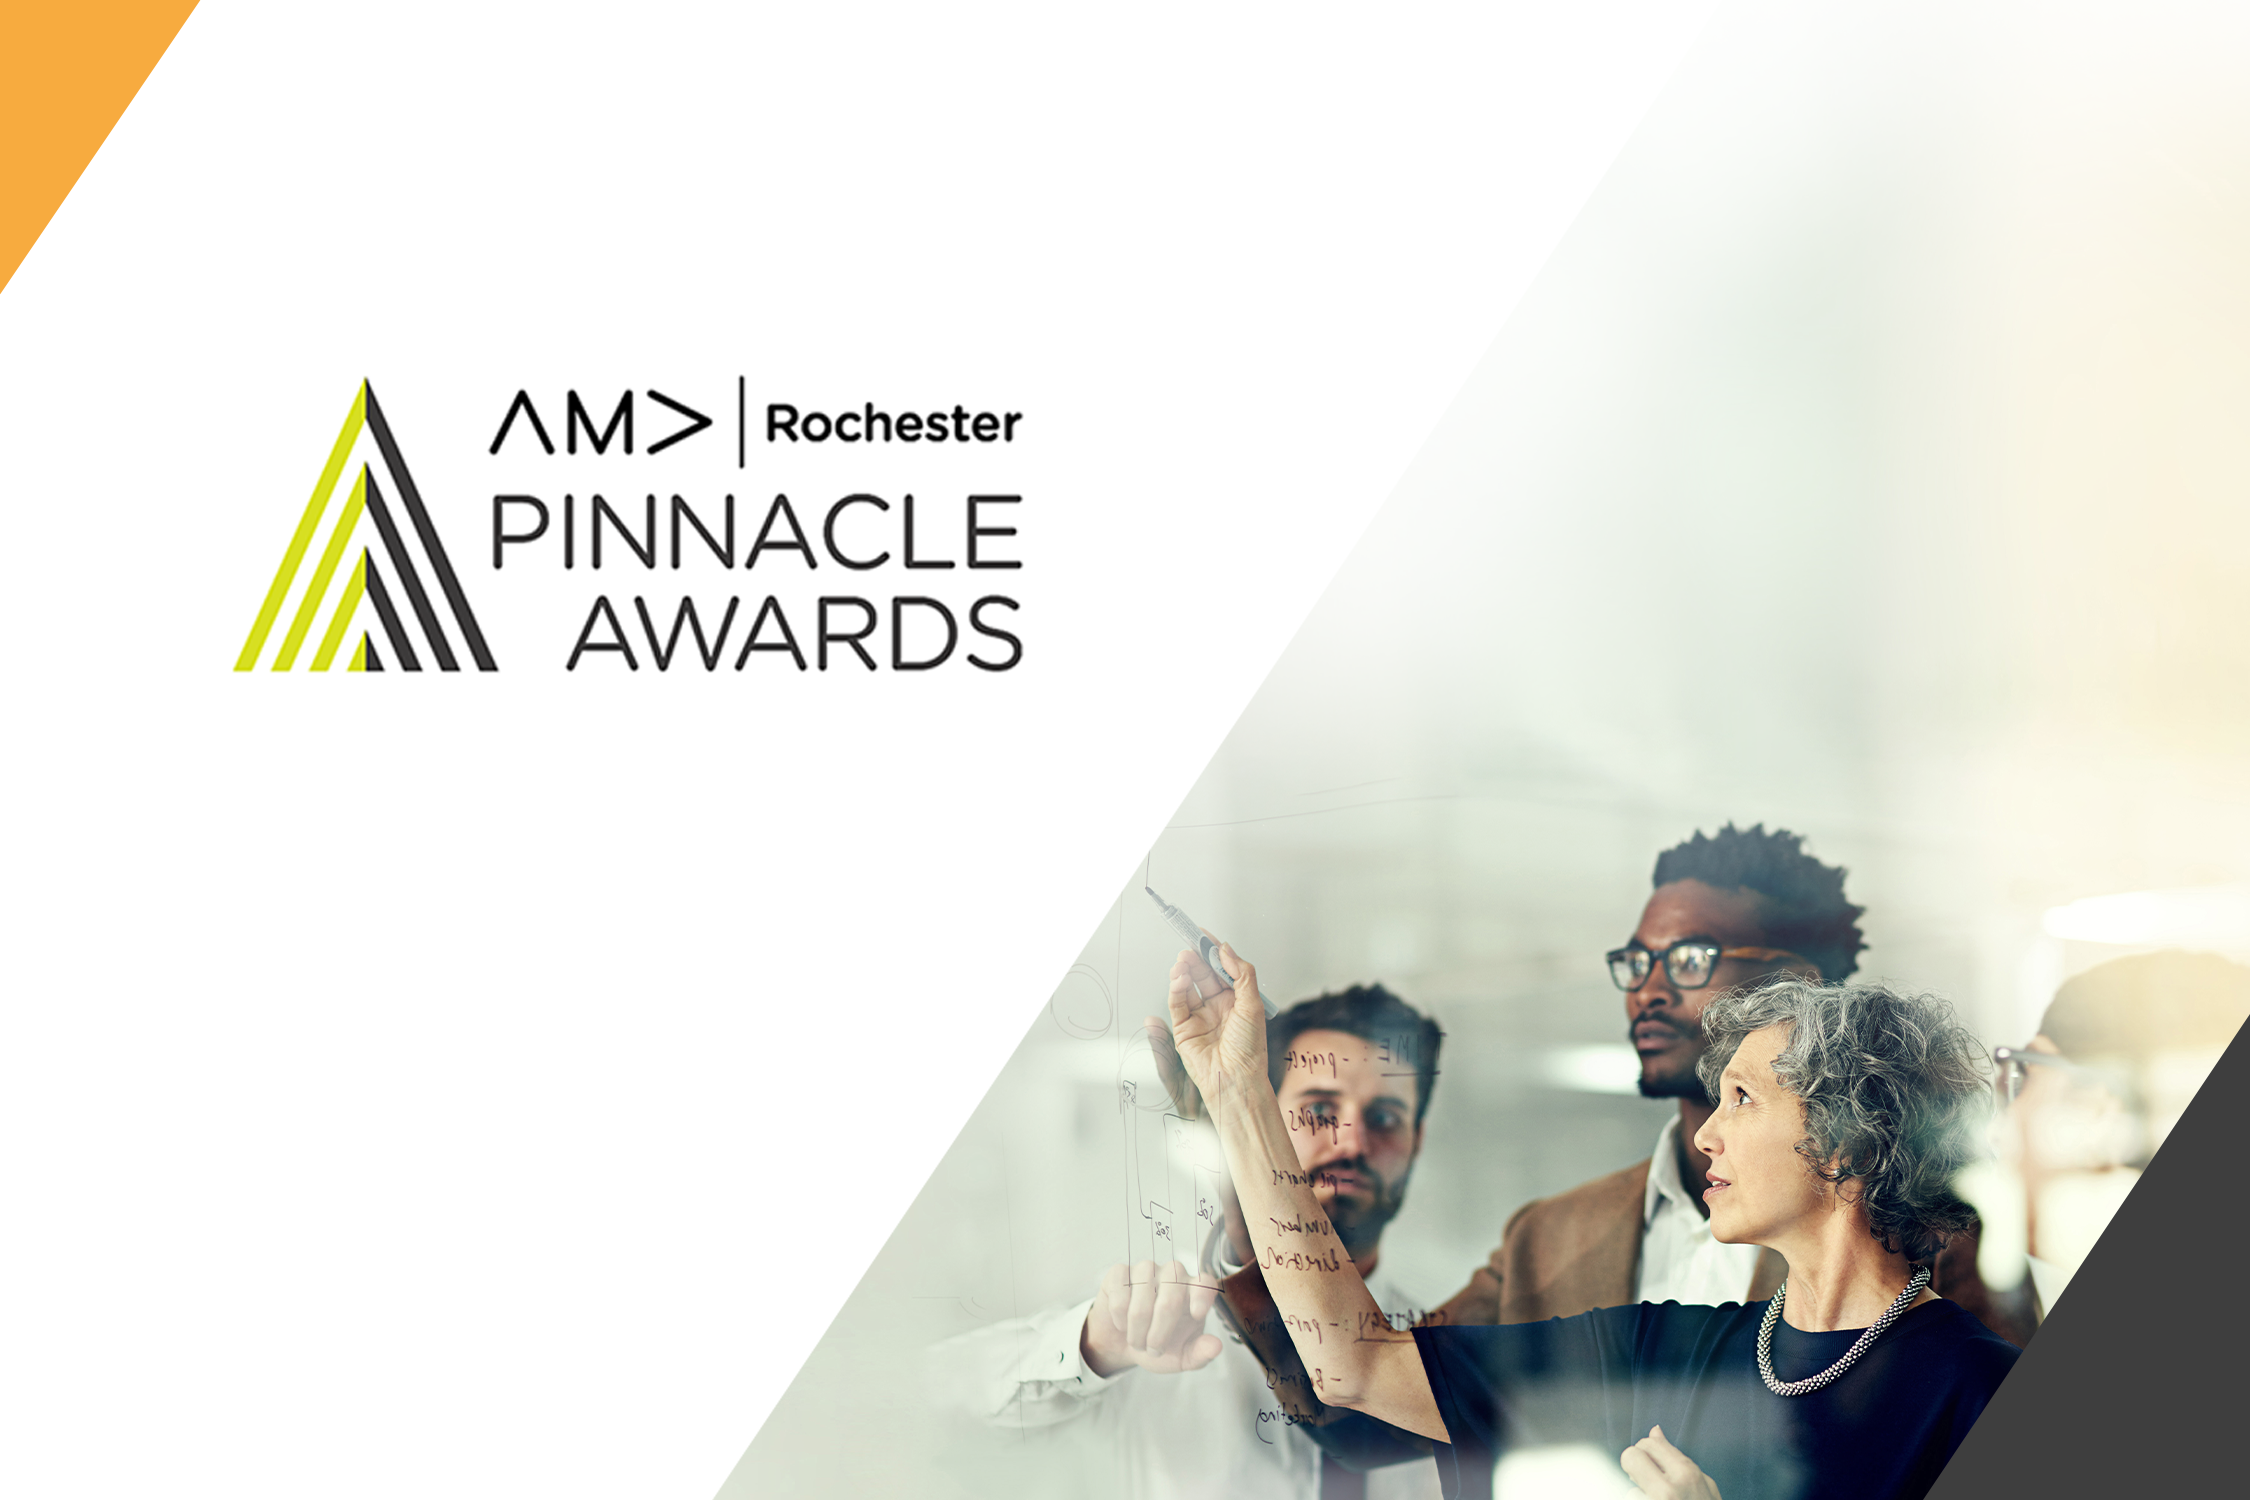 Group of people working together and collaborating. Graphic includes the logo of the Pinnacle Awards of the AMA | Rochester.